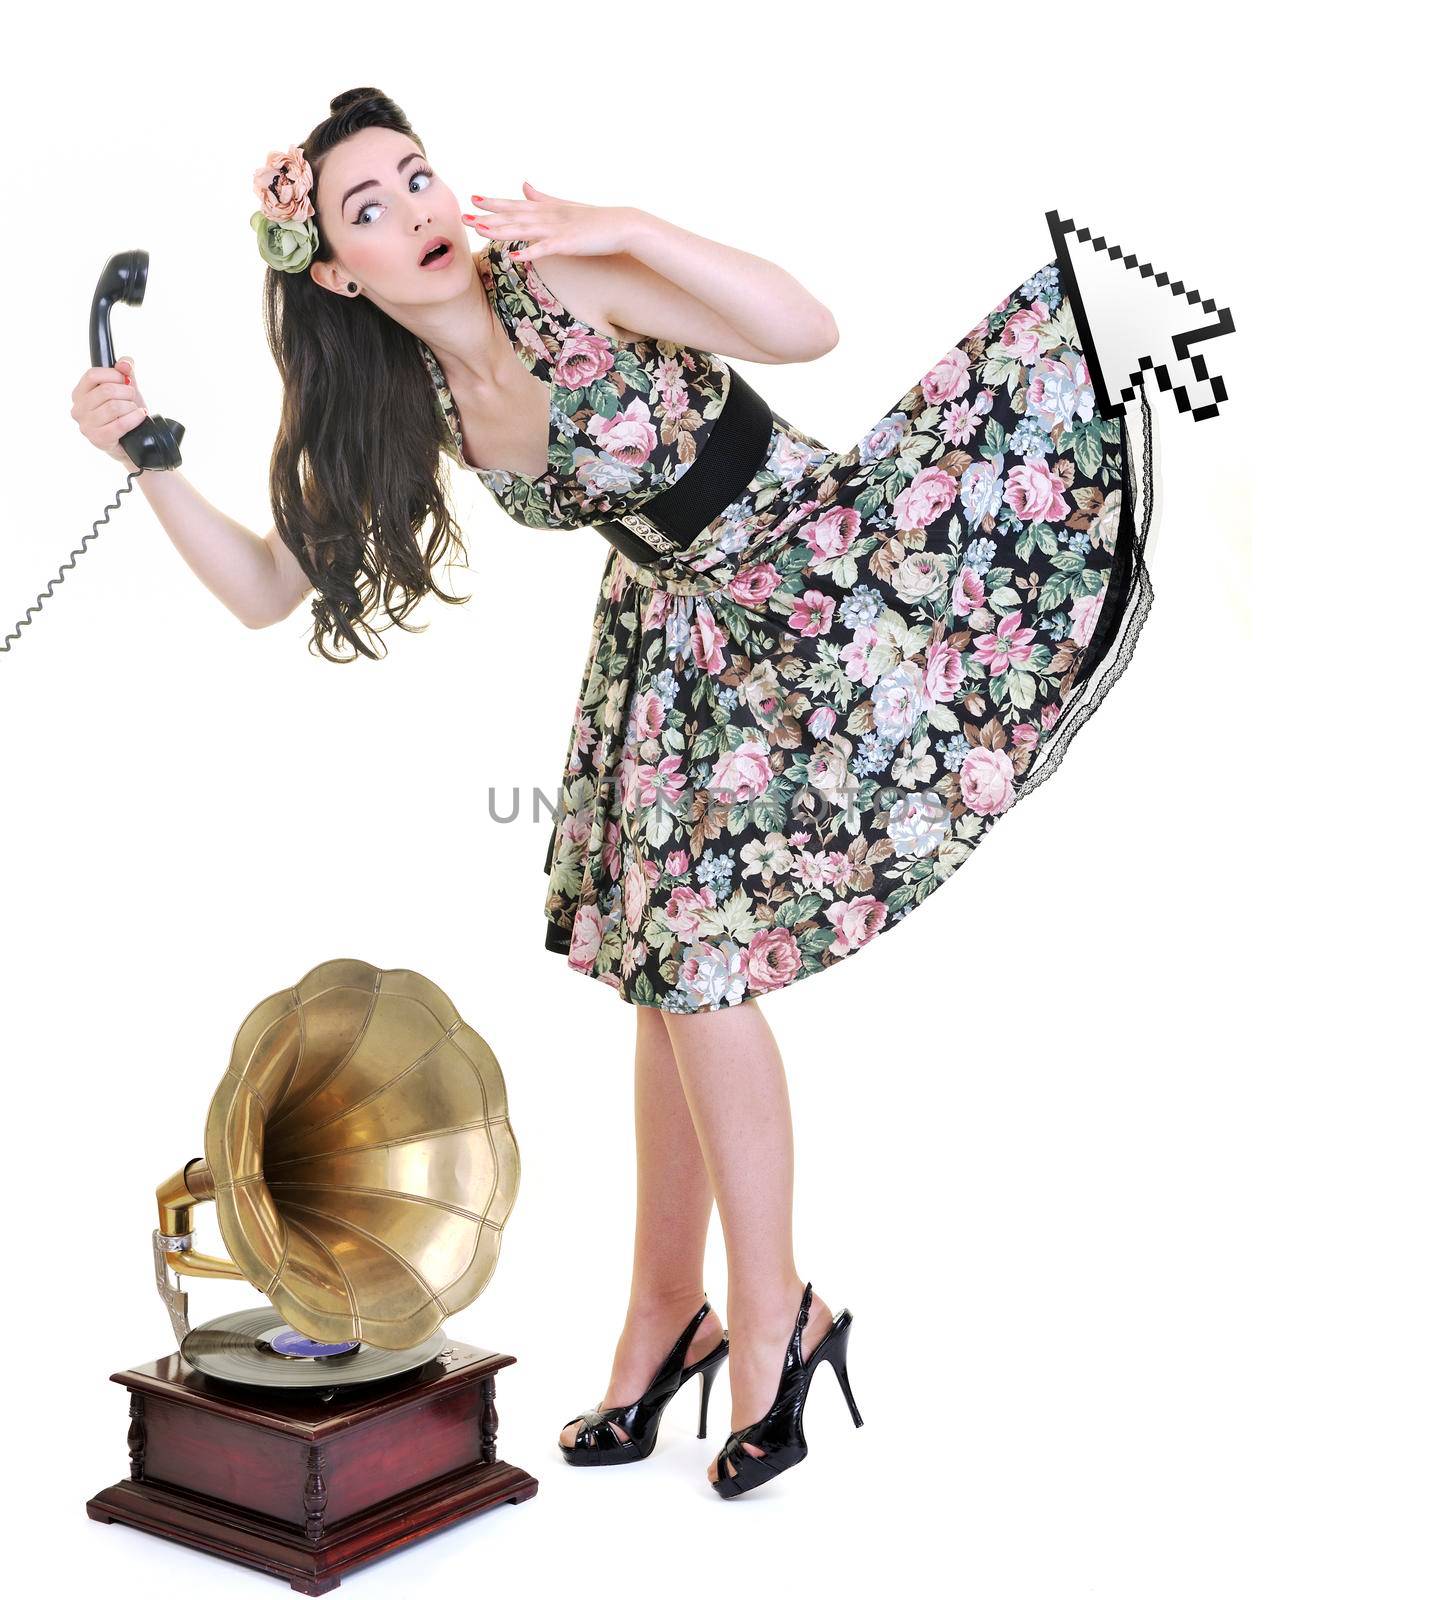 pretty young woman talking by old phone and mouse cursor arrow is holding her skirt